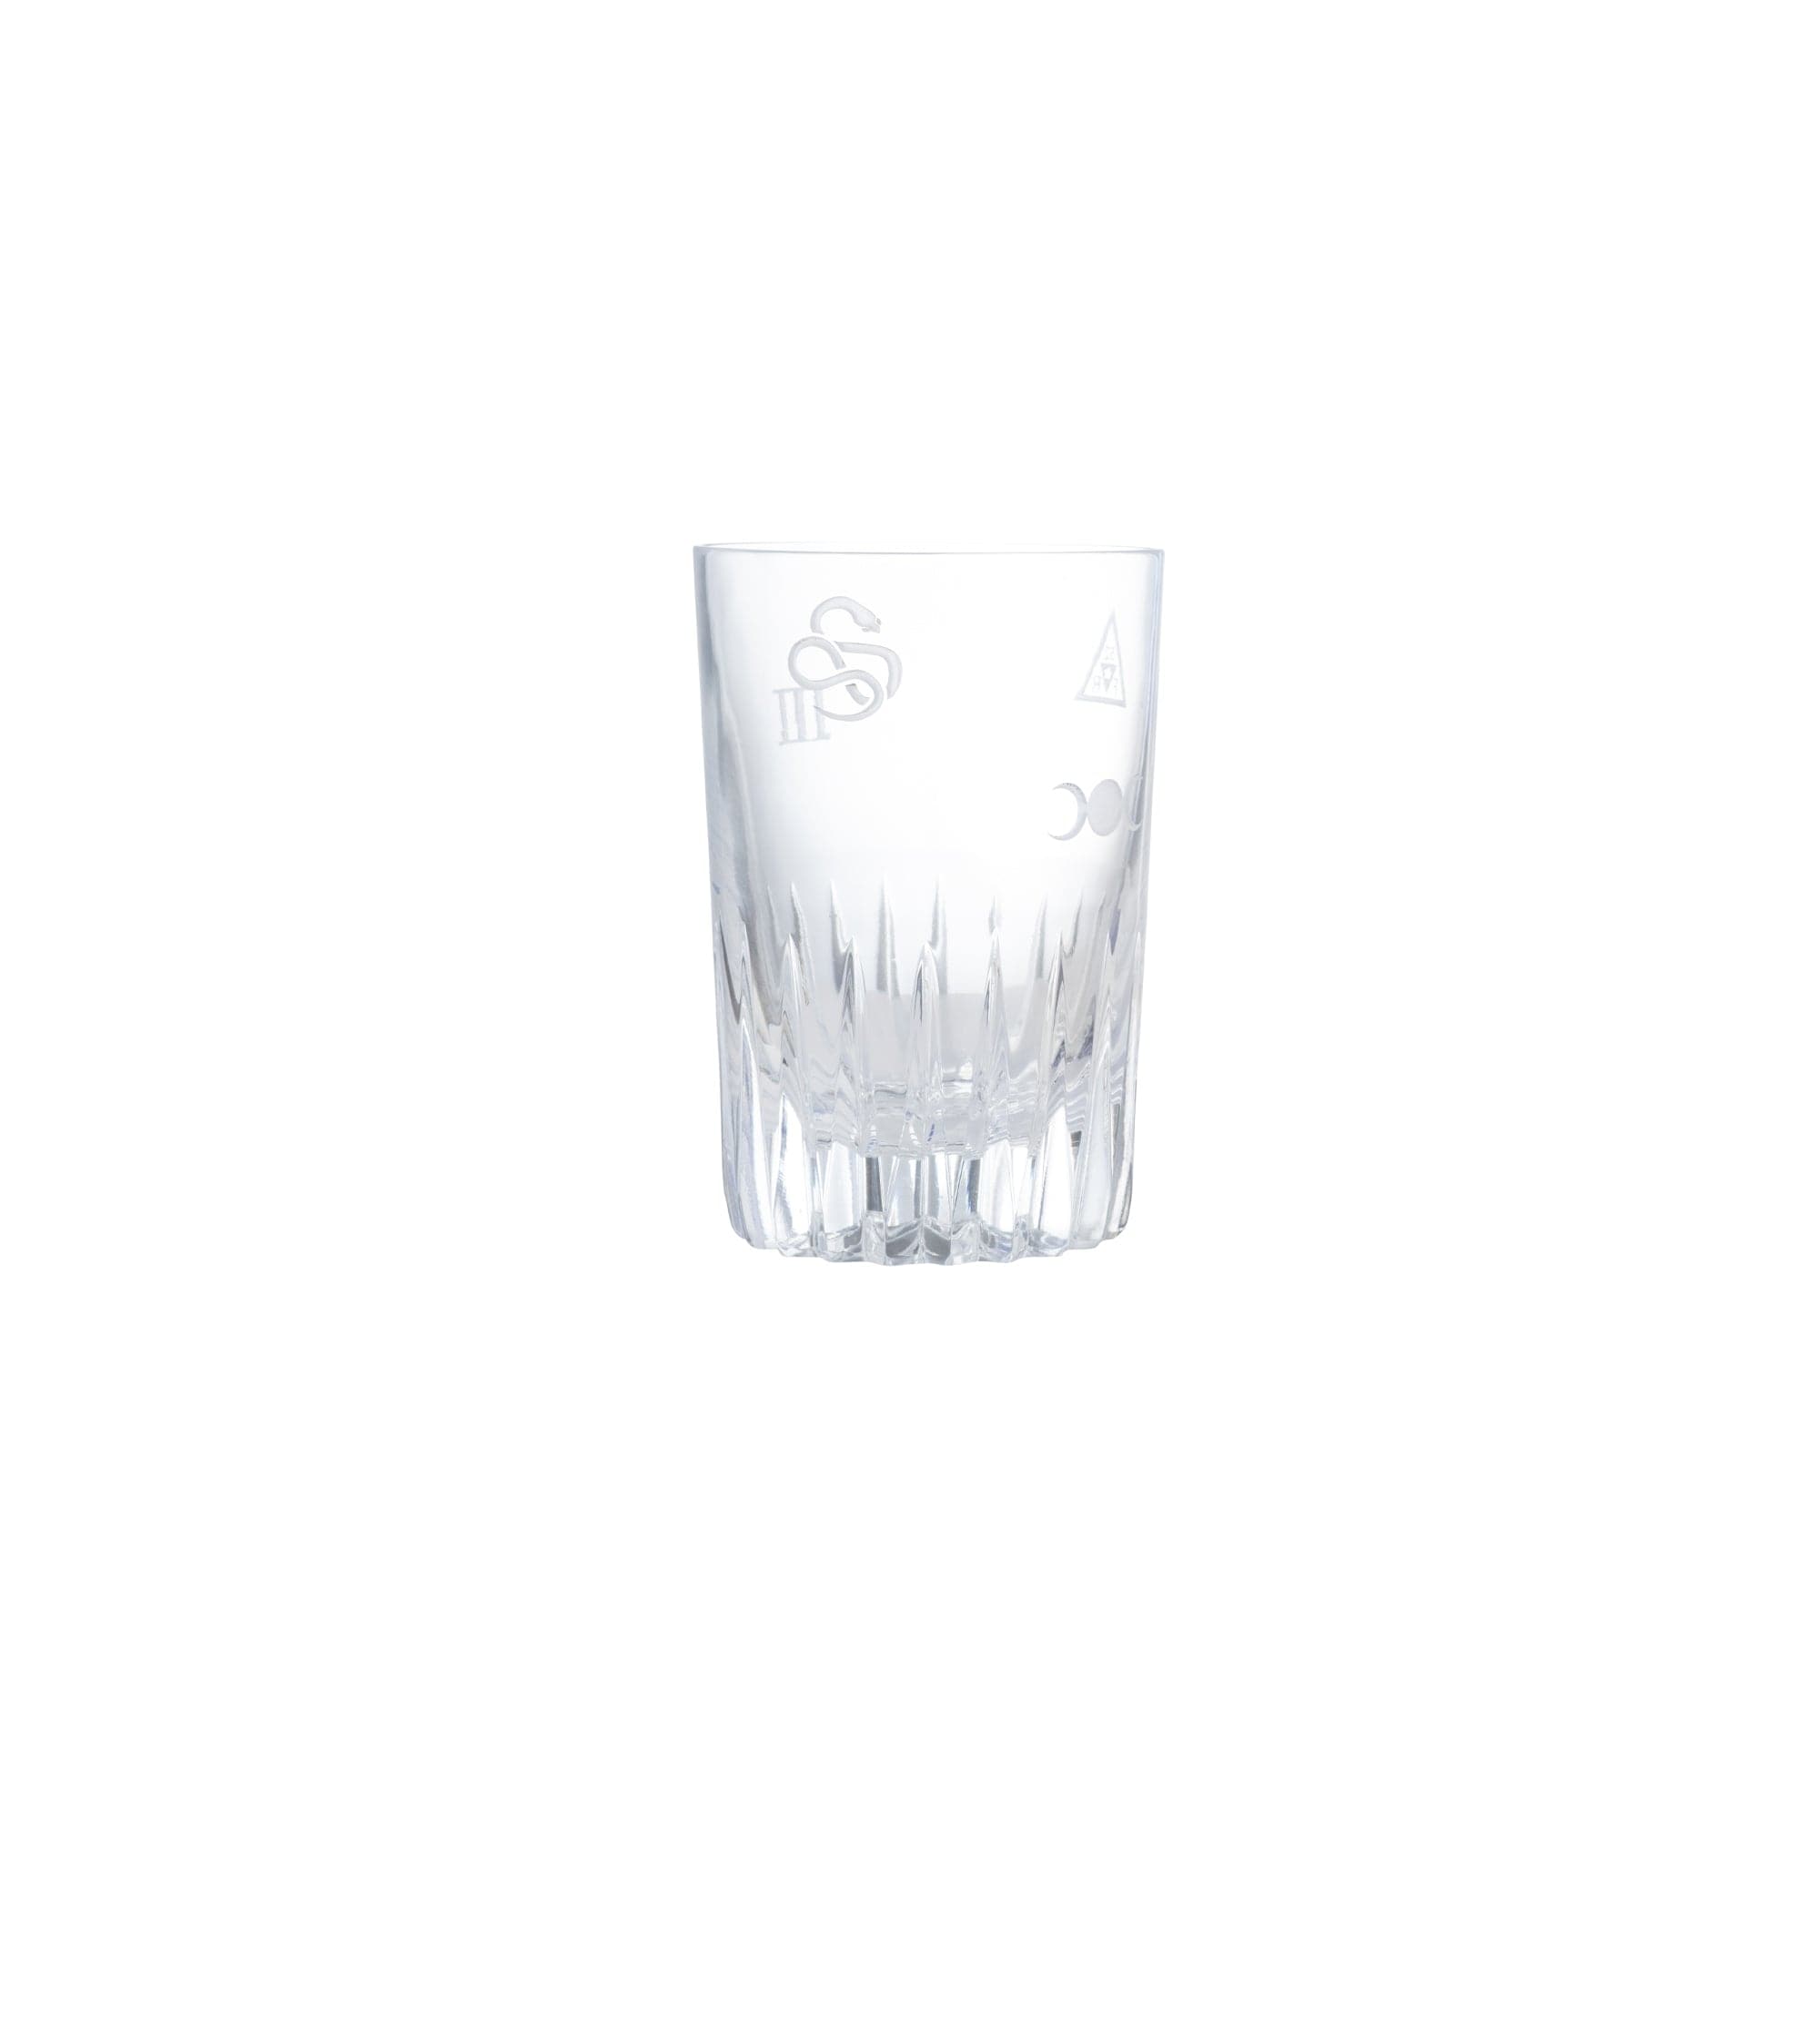 Wholeness : Water Glass